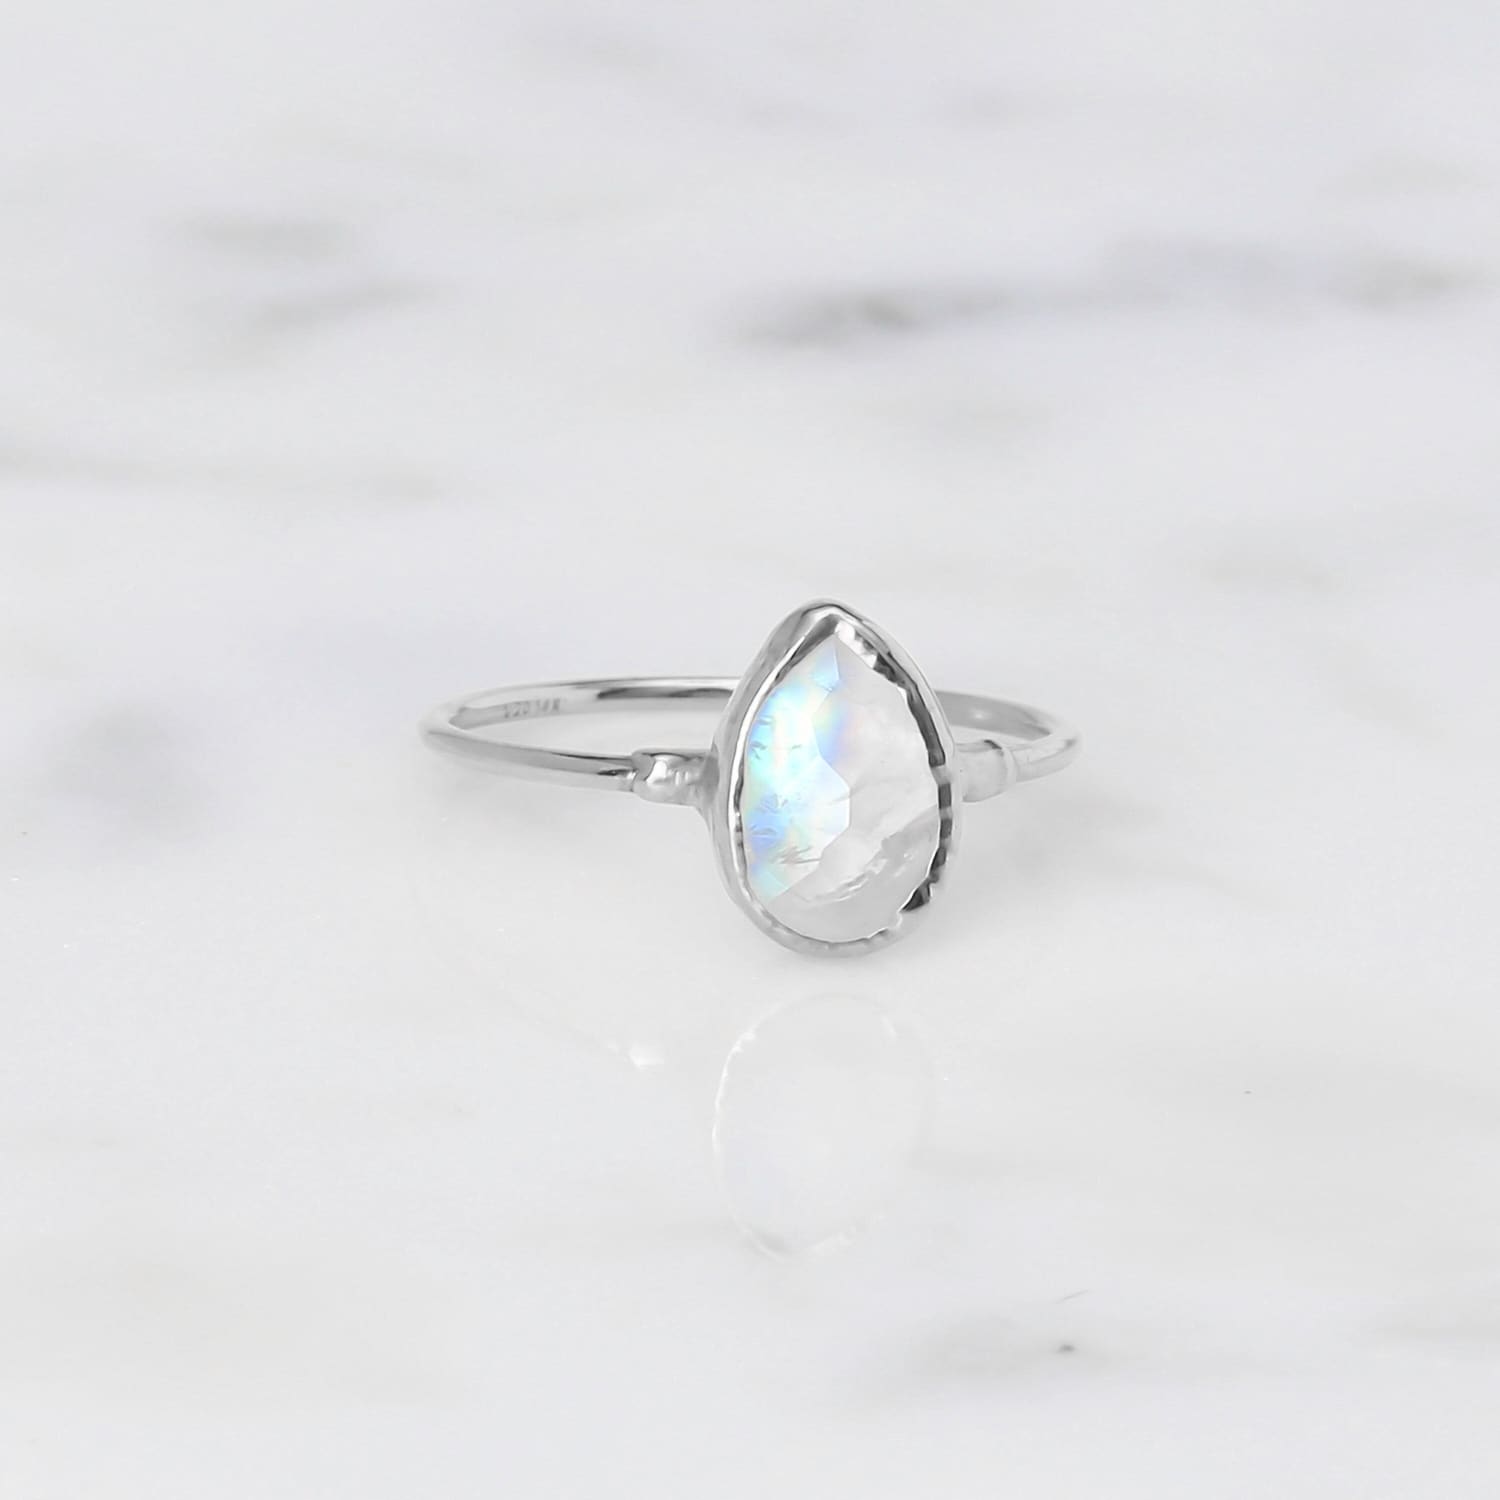 Rainbow Moonstone Wrap Ring with Sterling Silver Leaf Motifs - Ethereal  Perfection | NOVICA